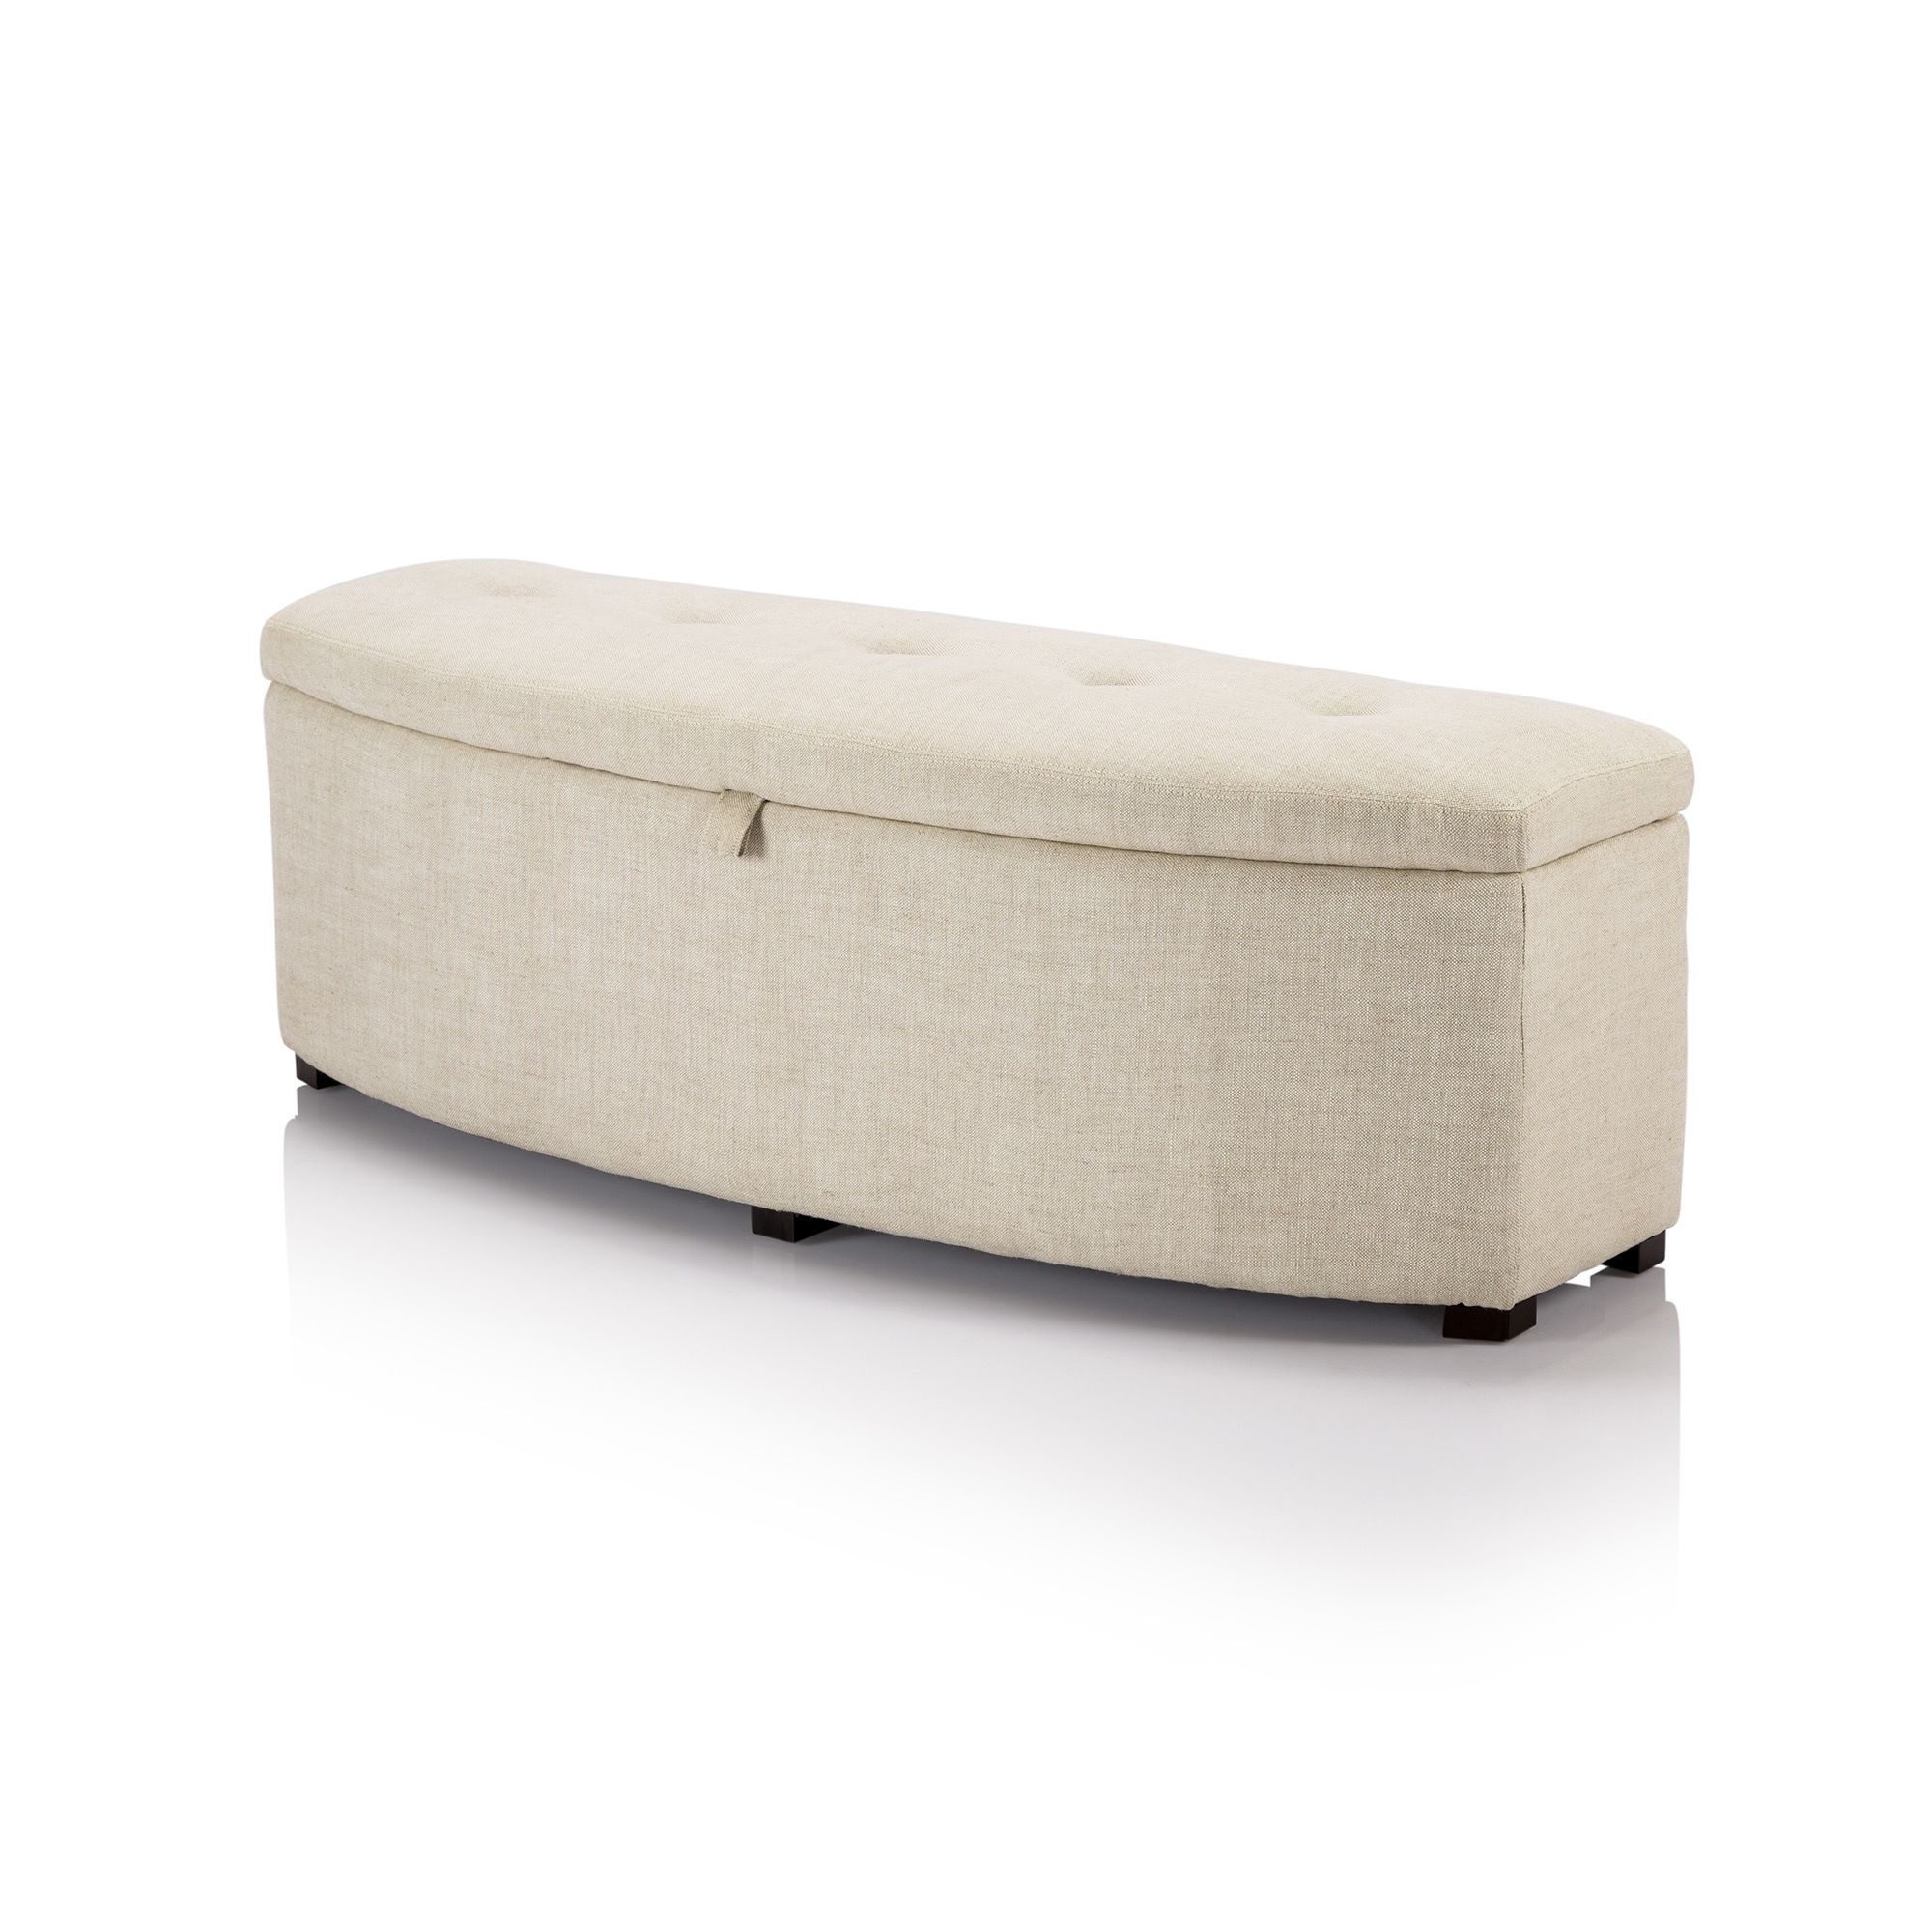 Most Popular Coconut Ottomans With Regard To Shop The Crescent Storage Ottoman Online In Australia (View 4 of 10)